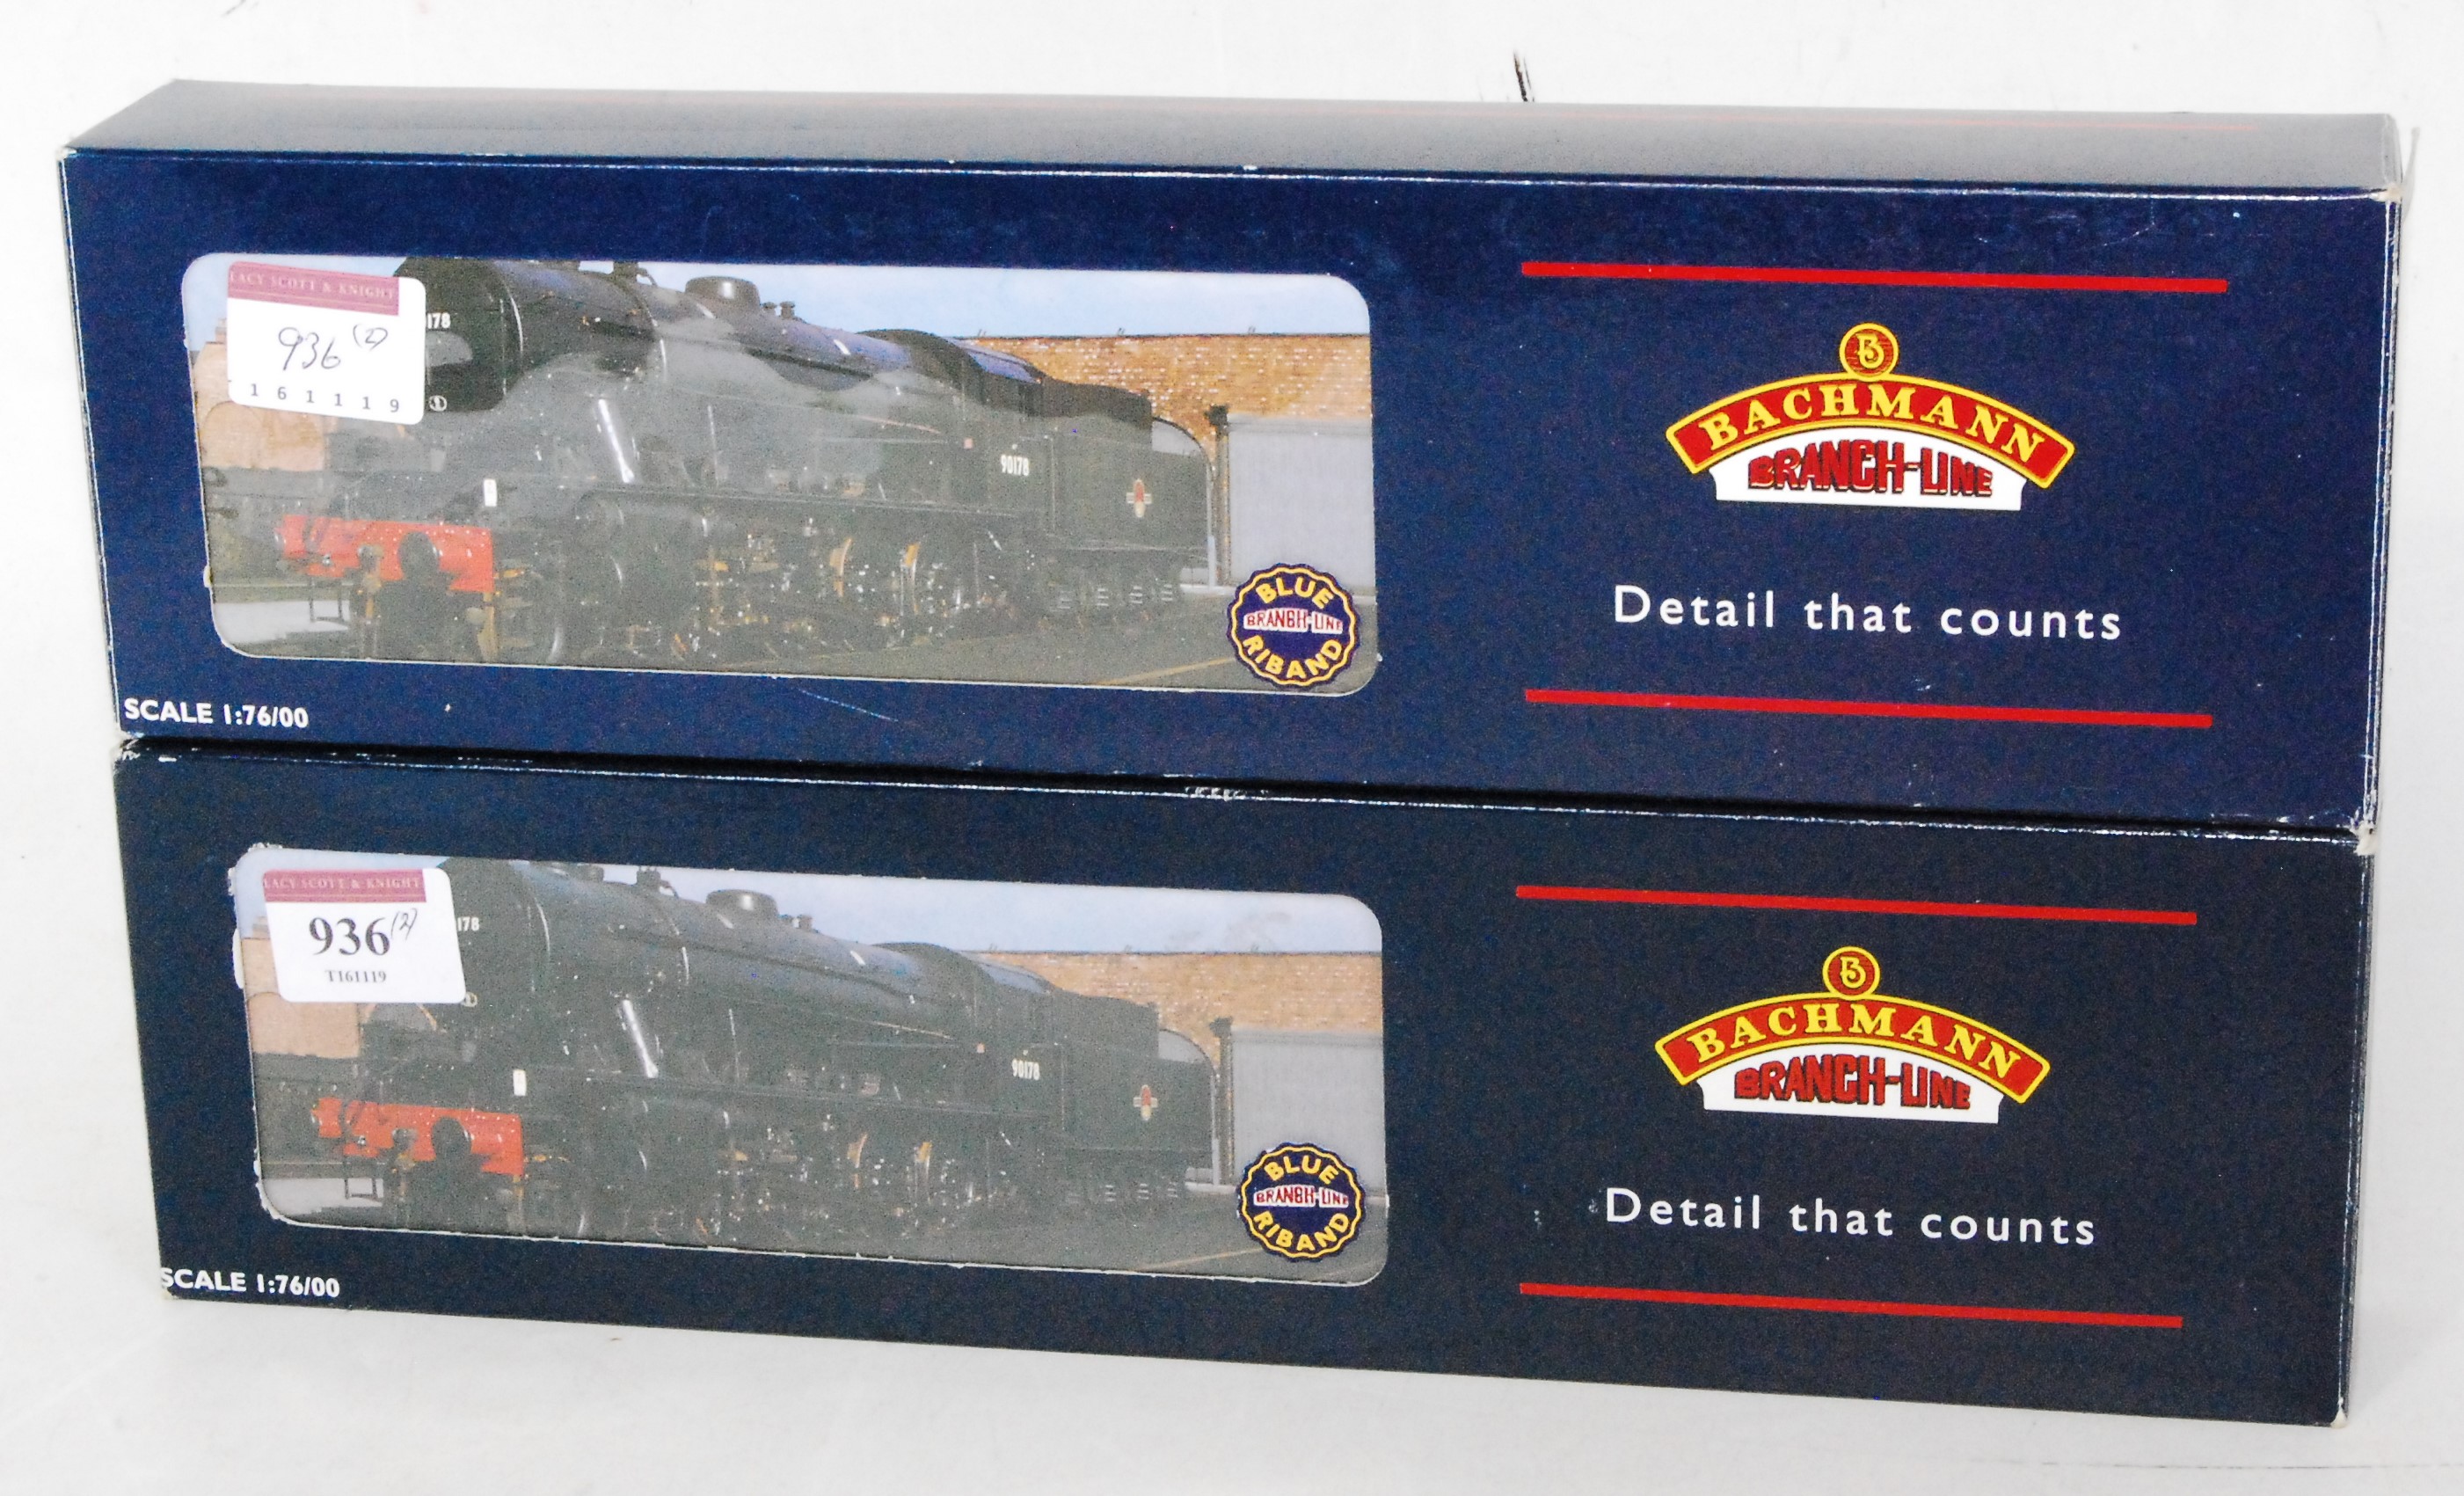 Bachmann 32-251 BR black Austerity 2-8-0 engine and tender No. 90274 (NM-BG) together with a similar